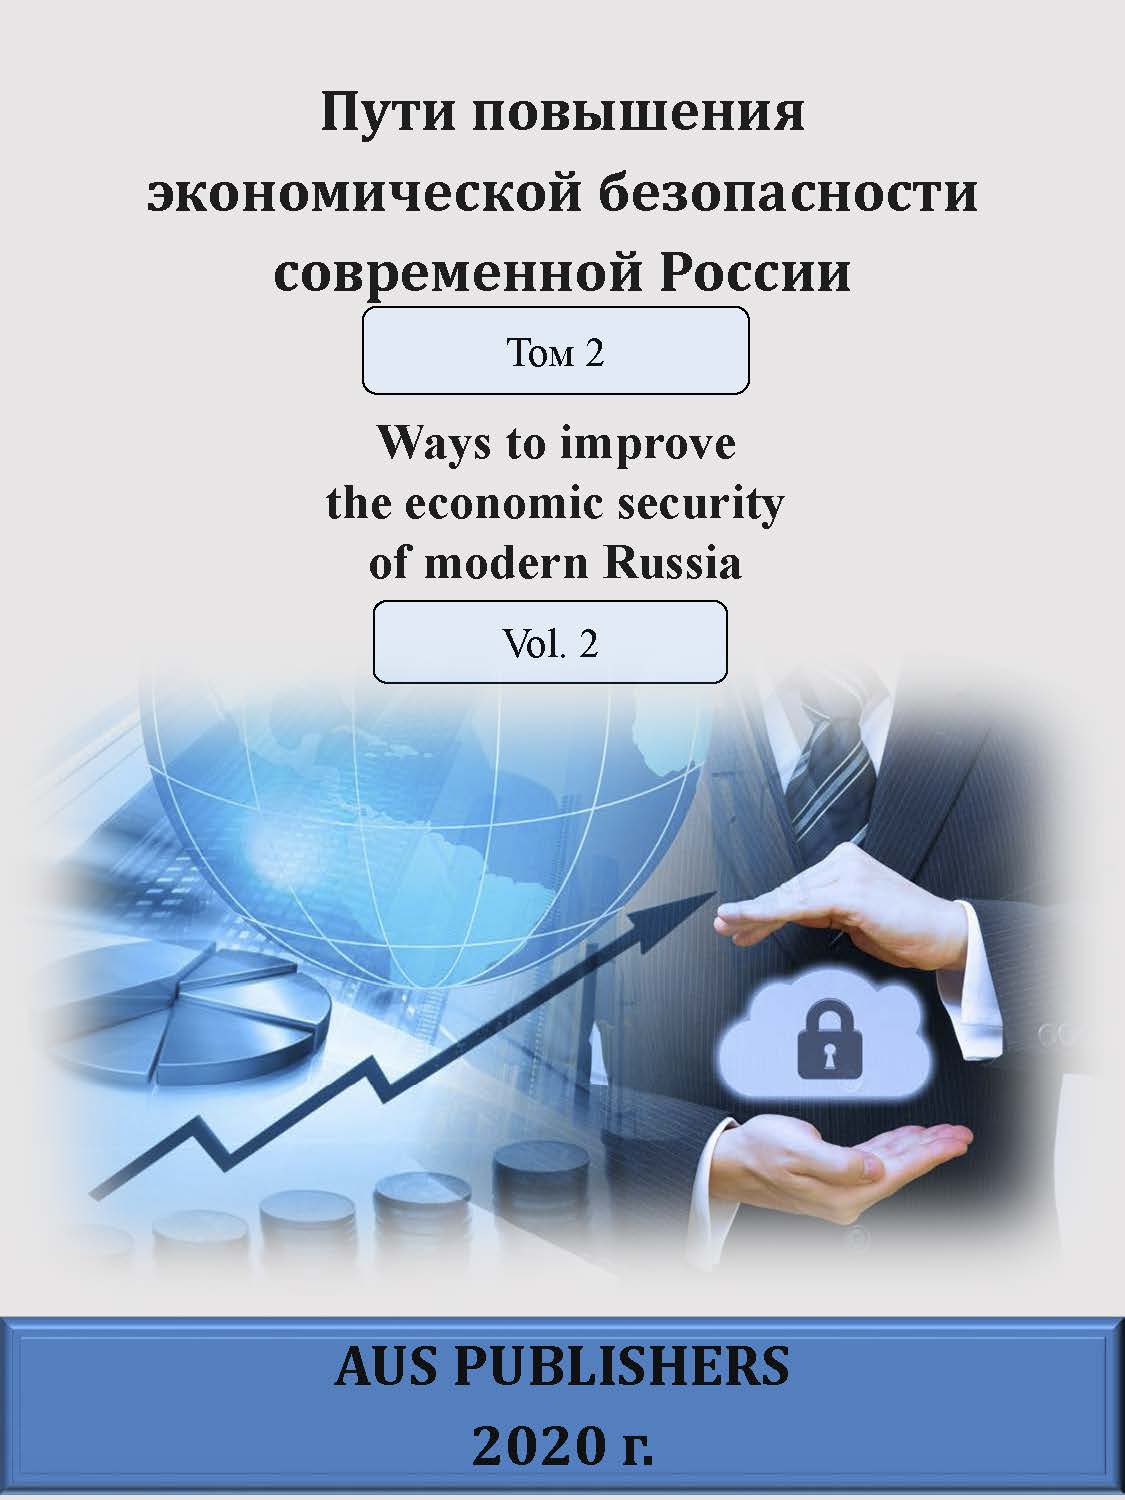                         PREREQUISITES FOR THE DEVELOPMENT OF THE INNOVATION SPHERE IN RUSSIA
            